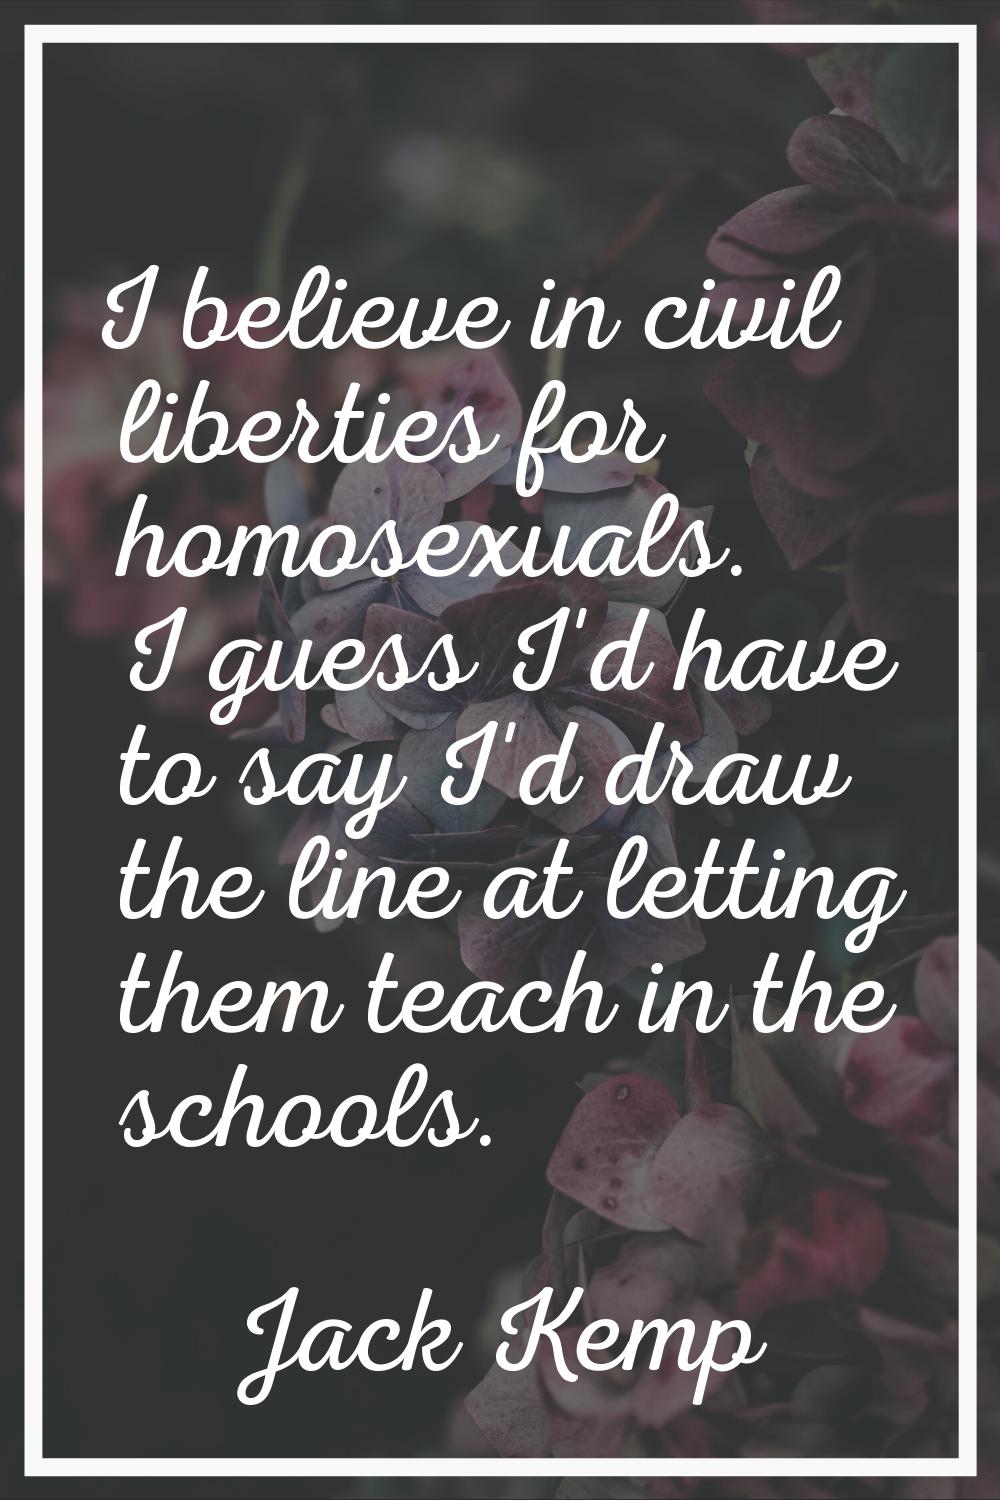 I believe in civil liberties for homosexuals. I guess I'd have to say I'd draw the line at letting 